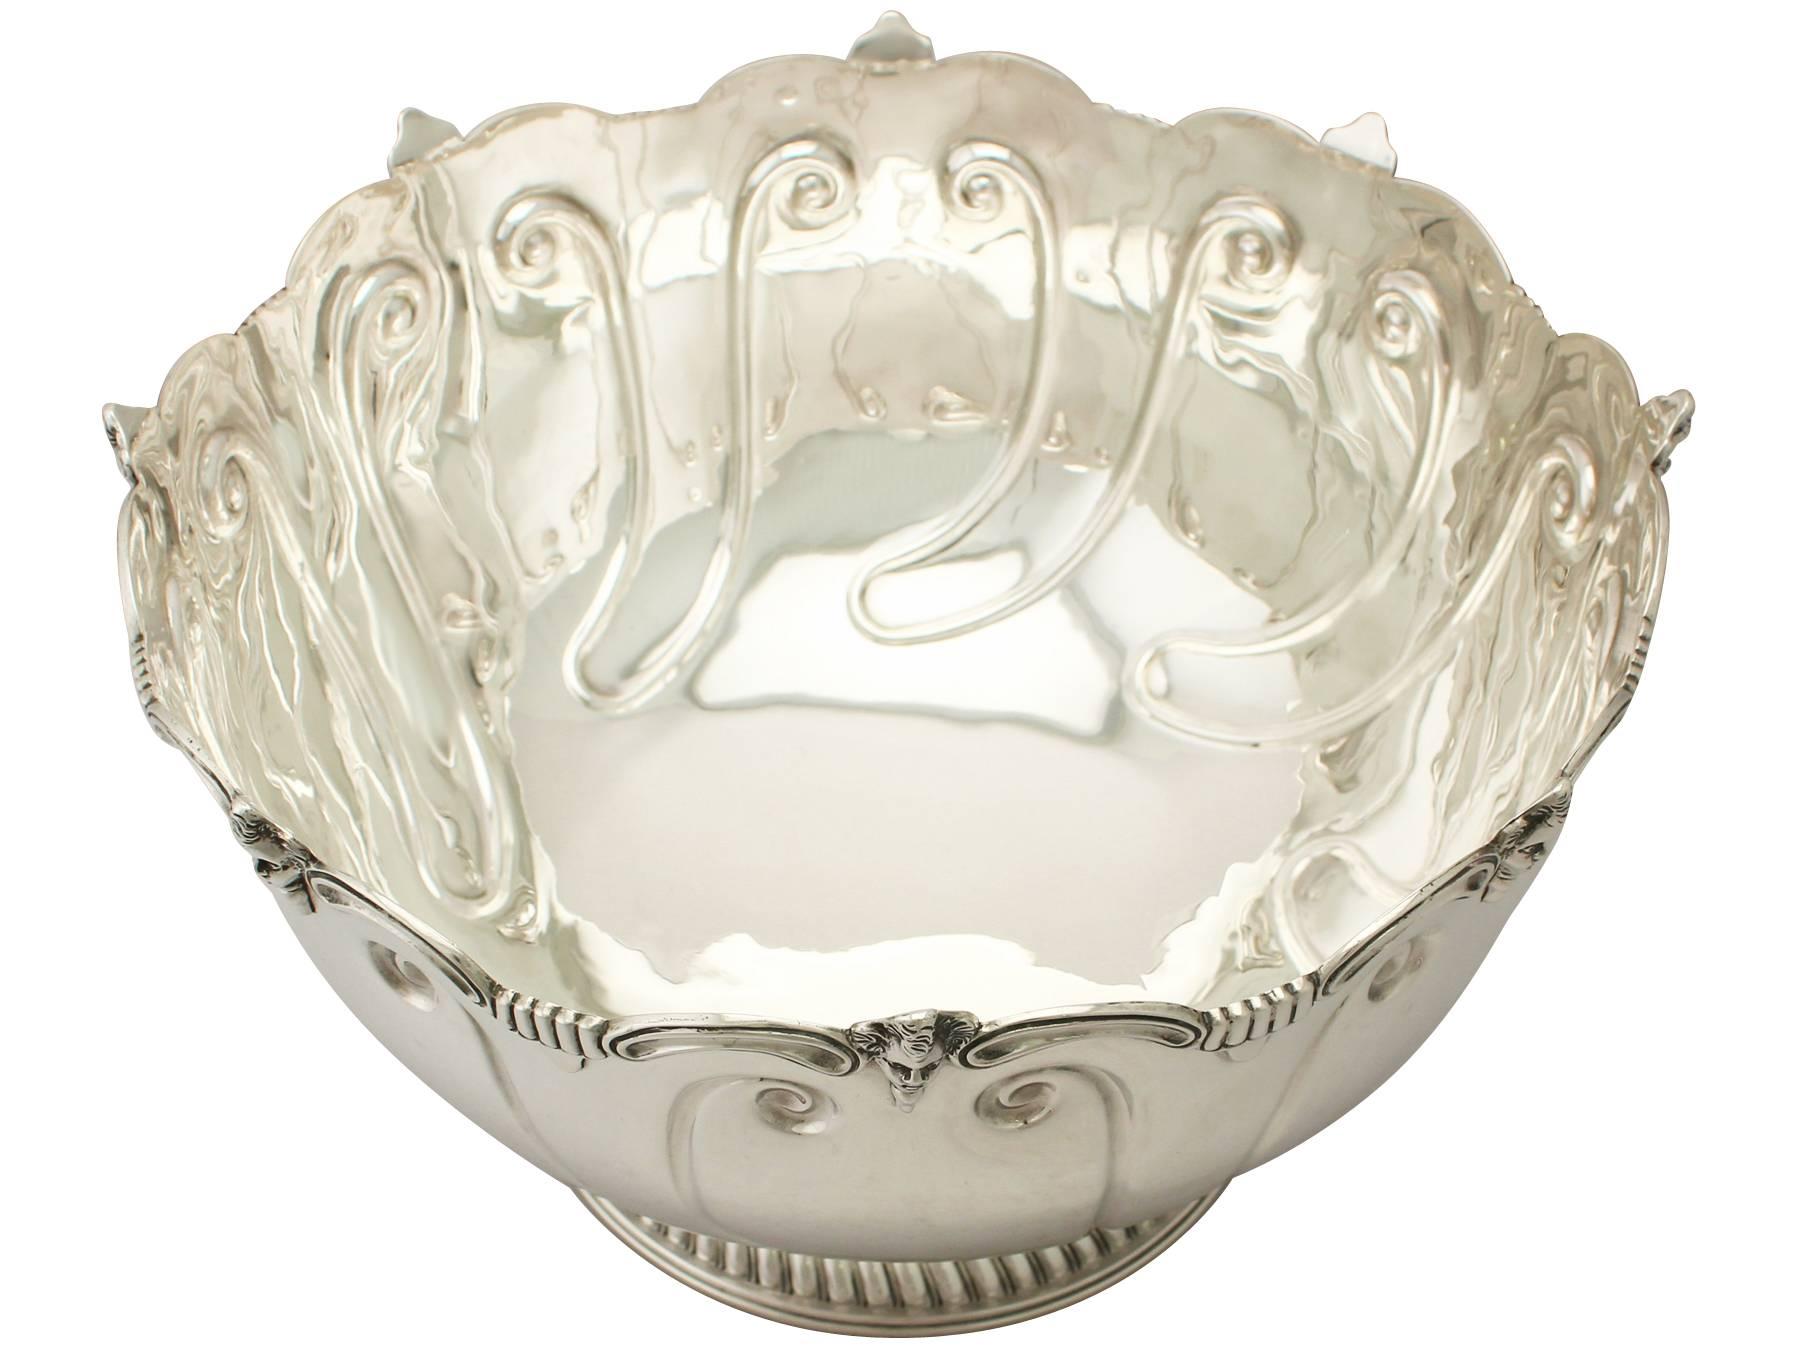 Early 20th Century Antique Edwardian Sterling Silver Presentation Bowl by Charles Stuart Harris